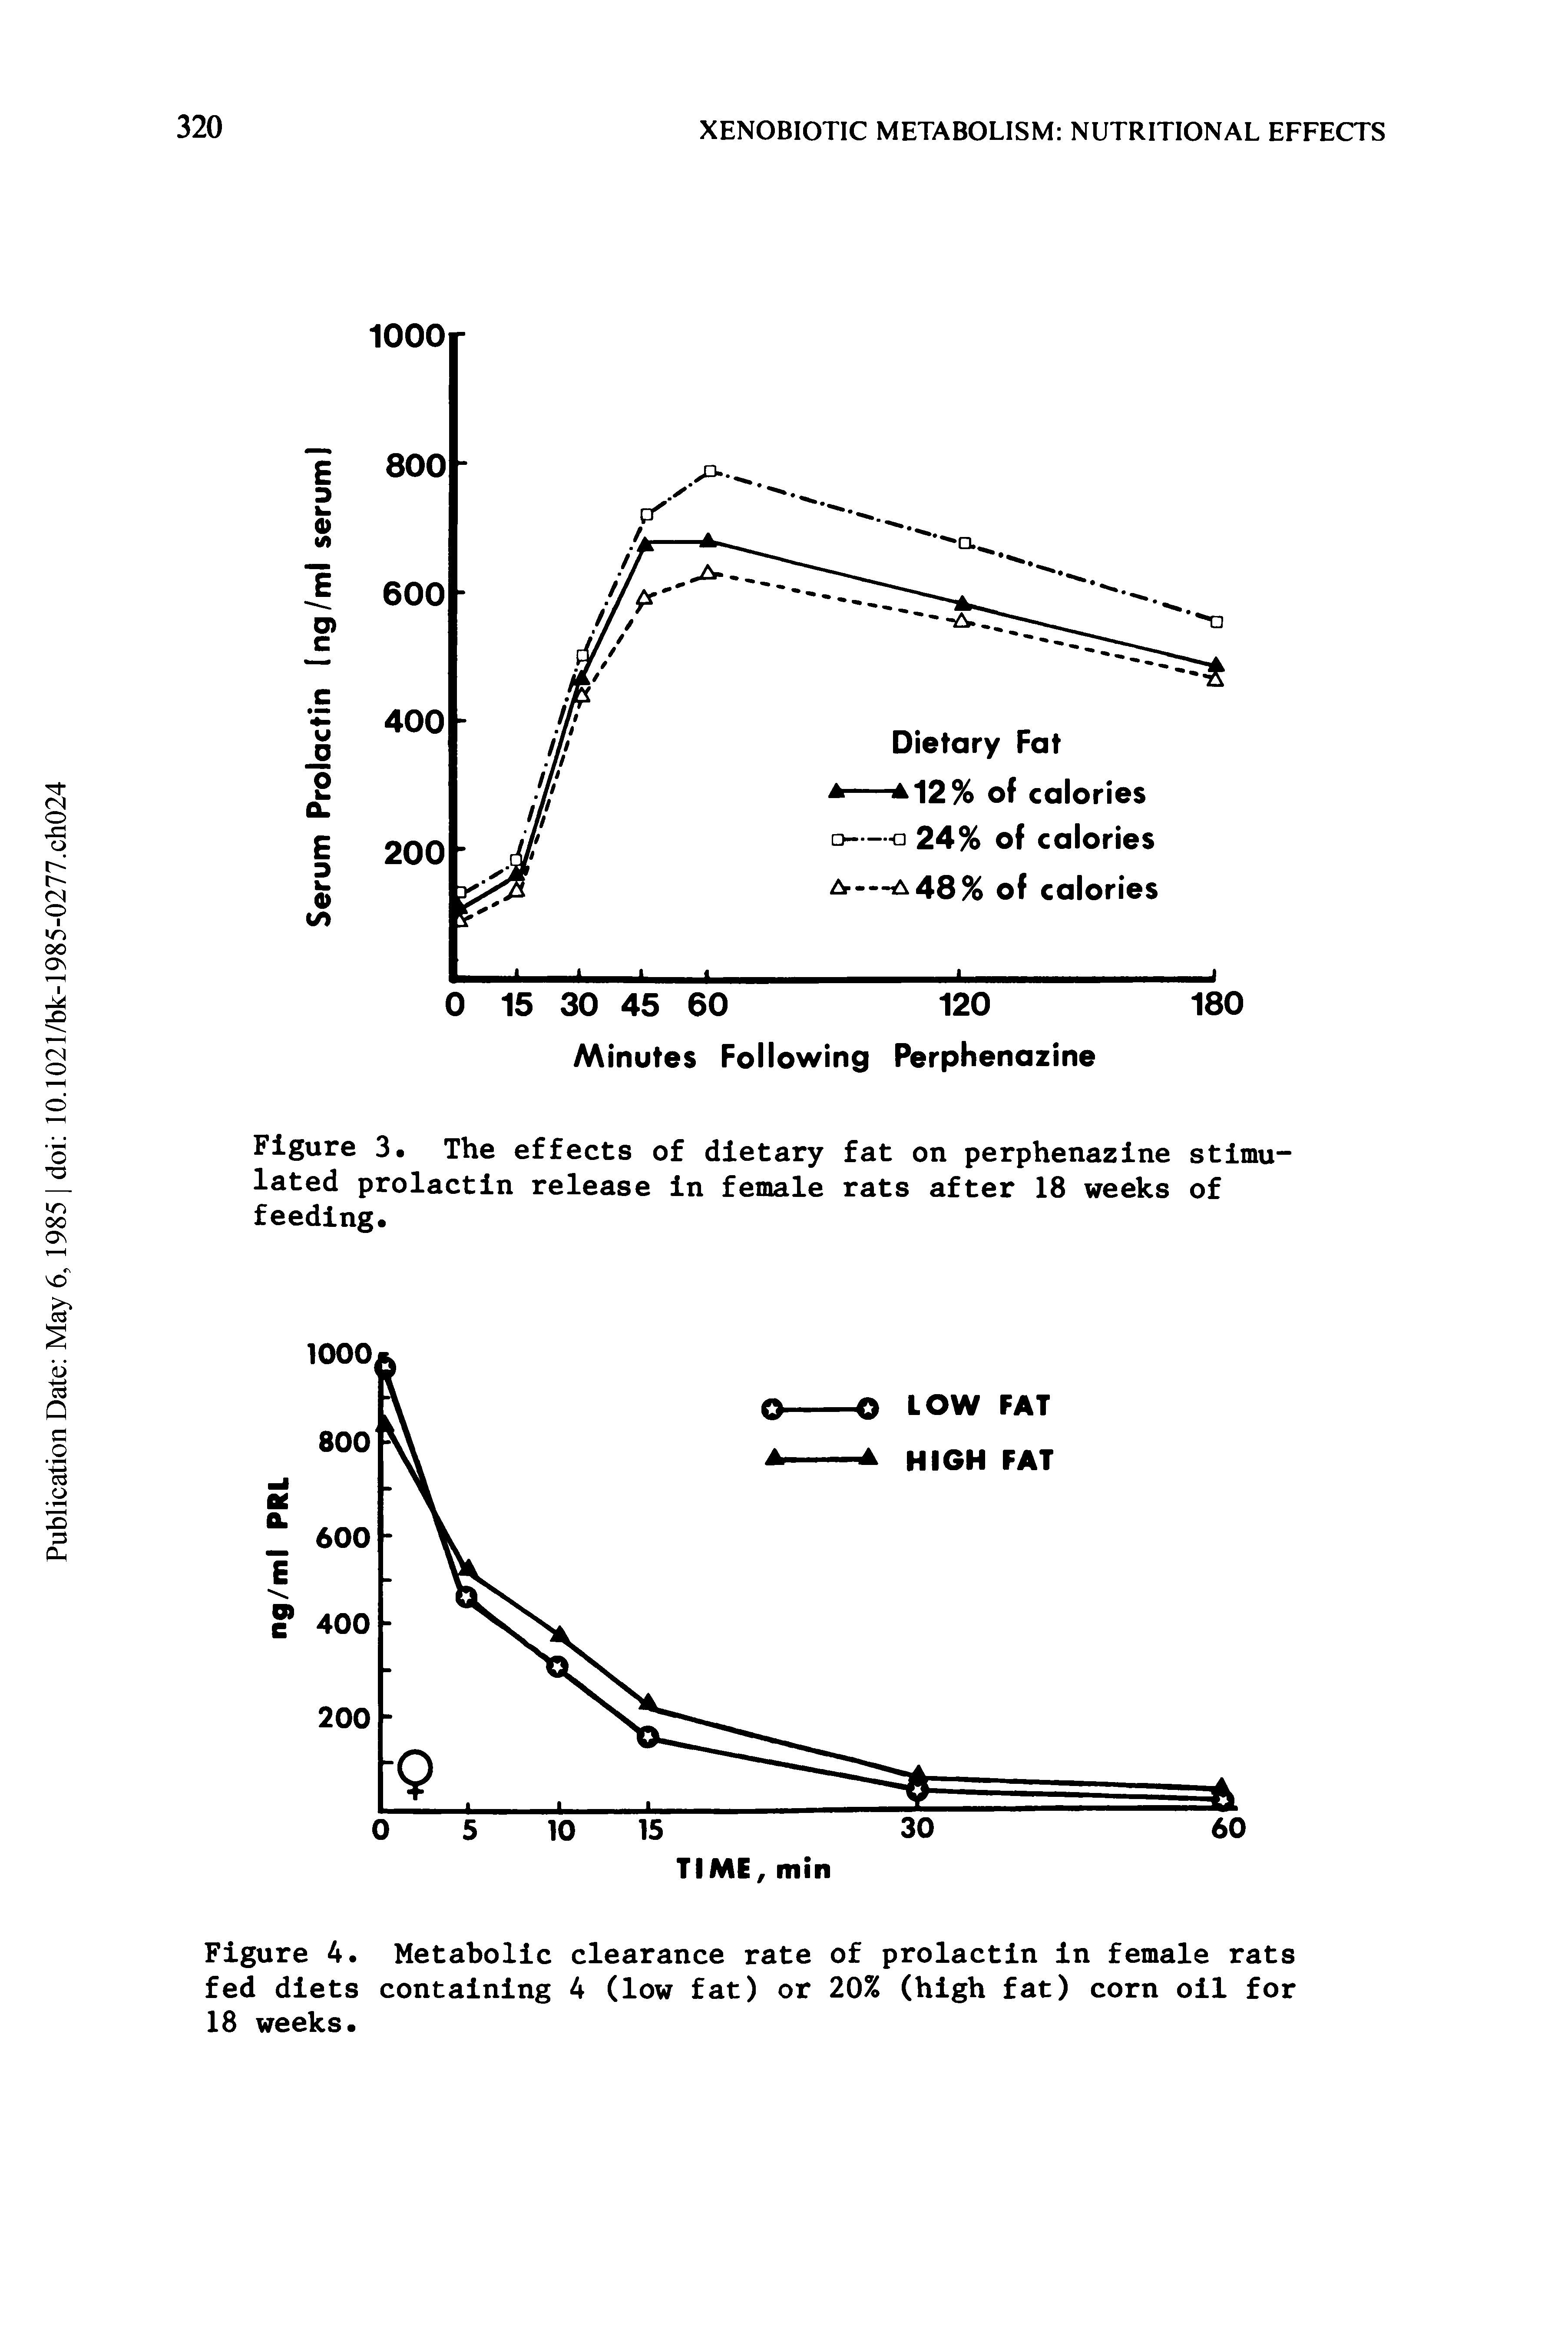 Figure 4. Metabolic clearance rate of prolactin in female rats fed diets containing 4 (low fat) or 20% (high fat) corn oil for 18 weeks.